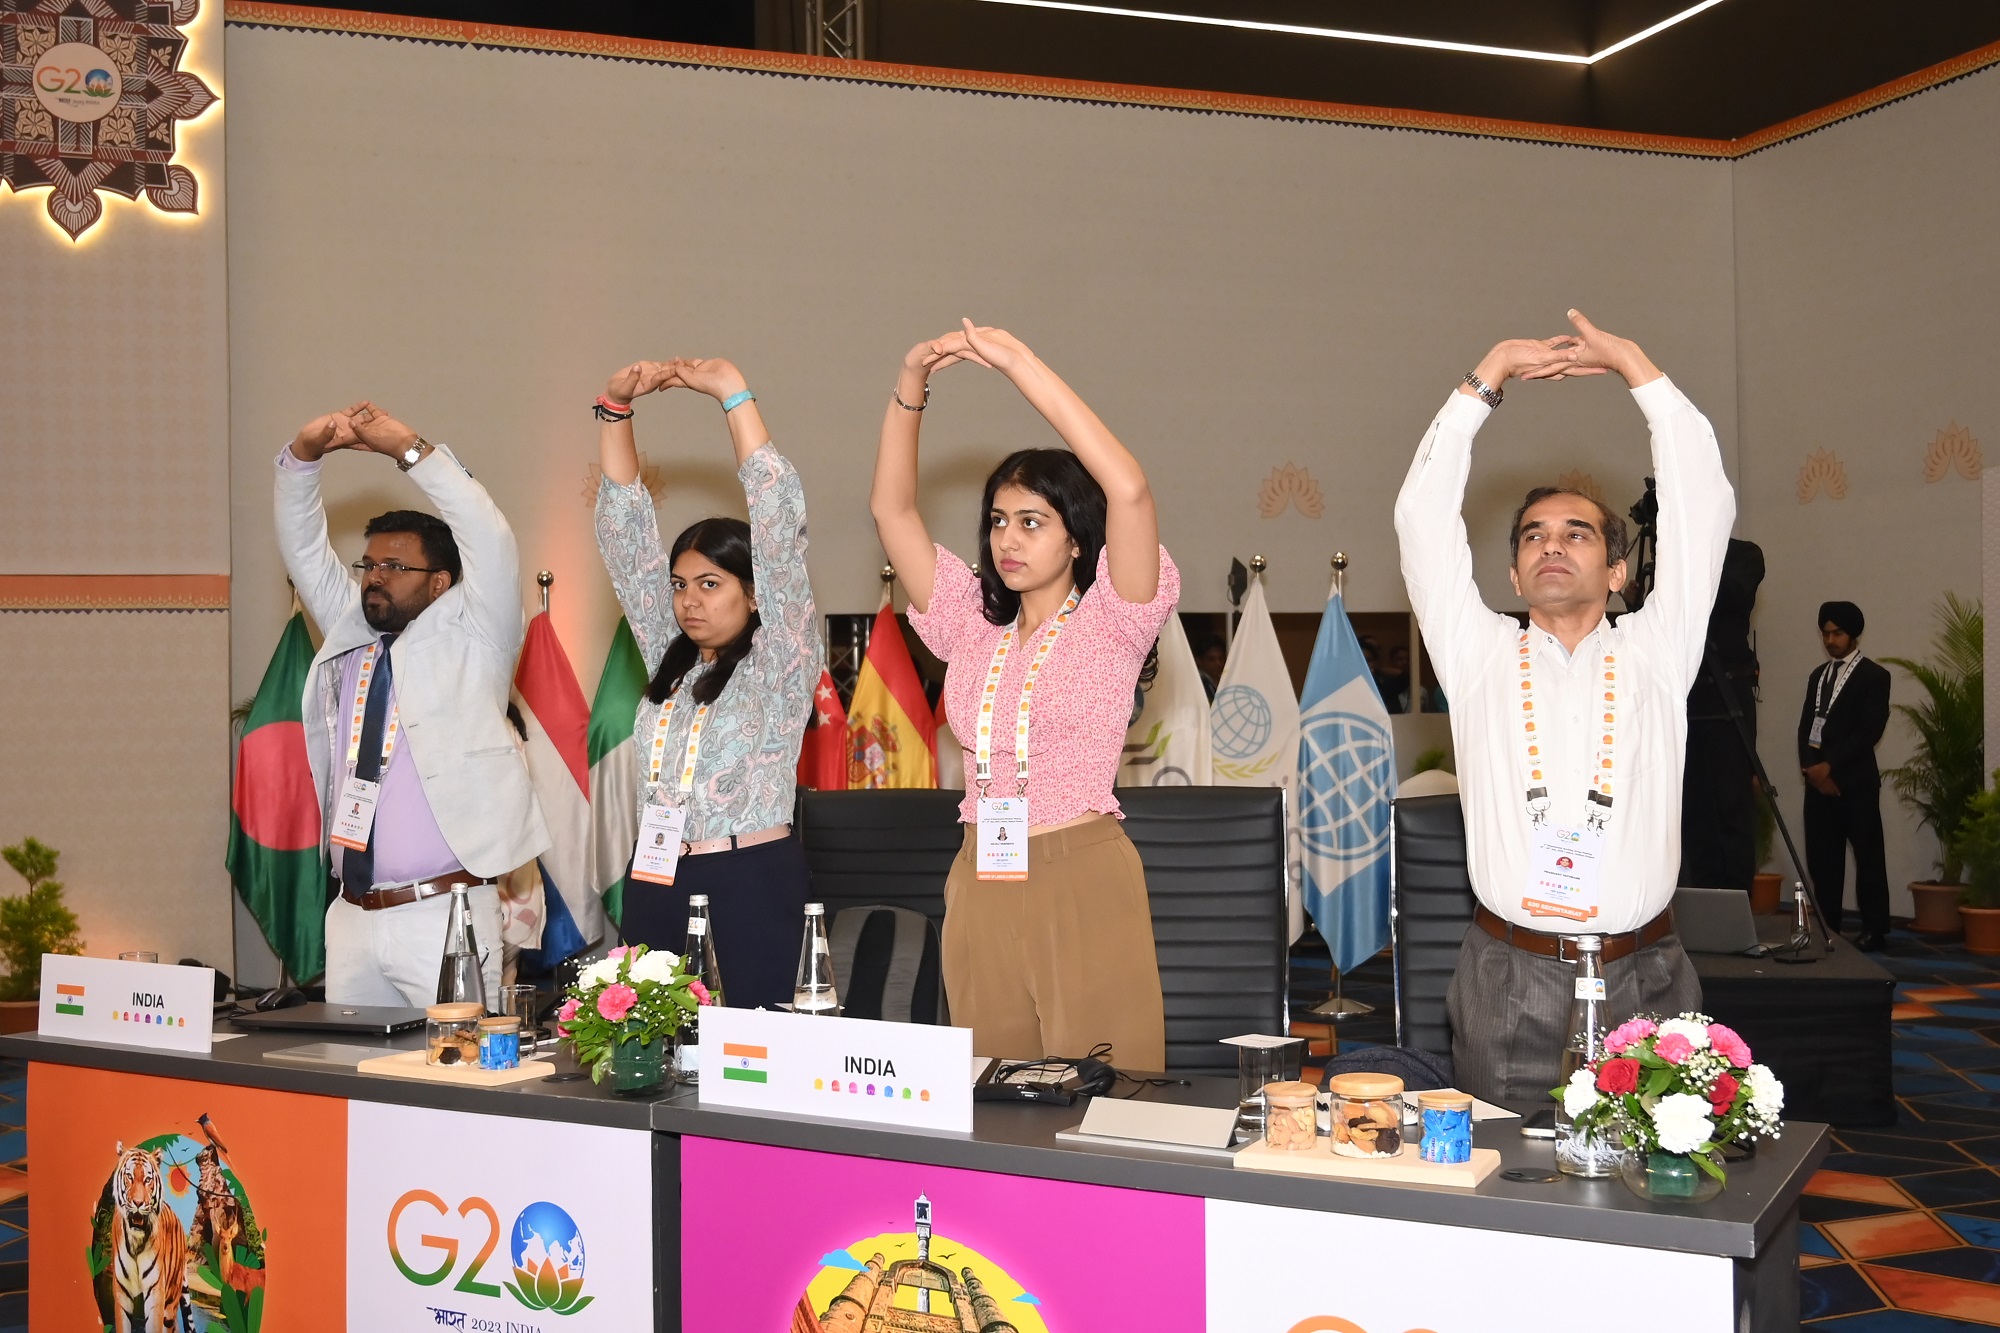 Short yoga stretch for the delegates on the 2nd Day of the 4th EWG & LEM meeting, being held at Indore, on 20.07.2023.